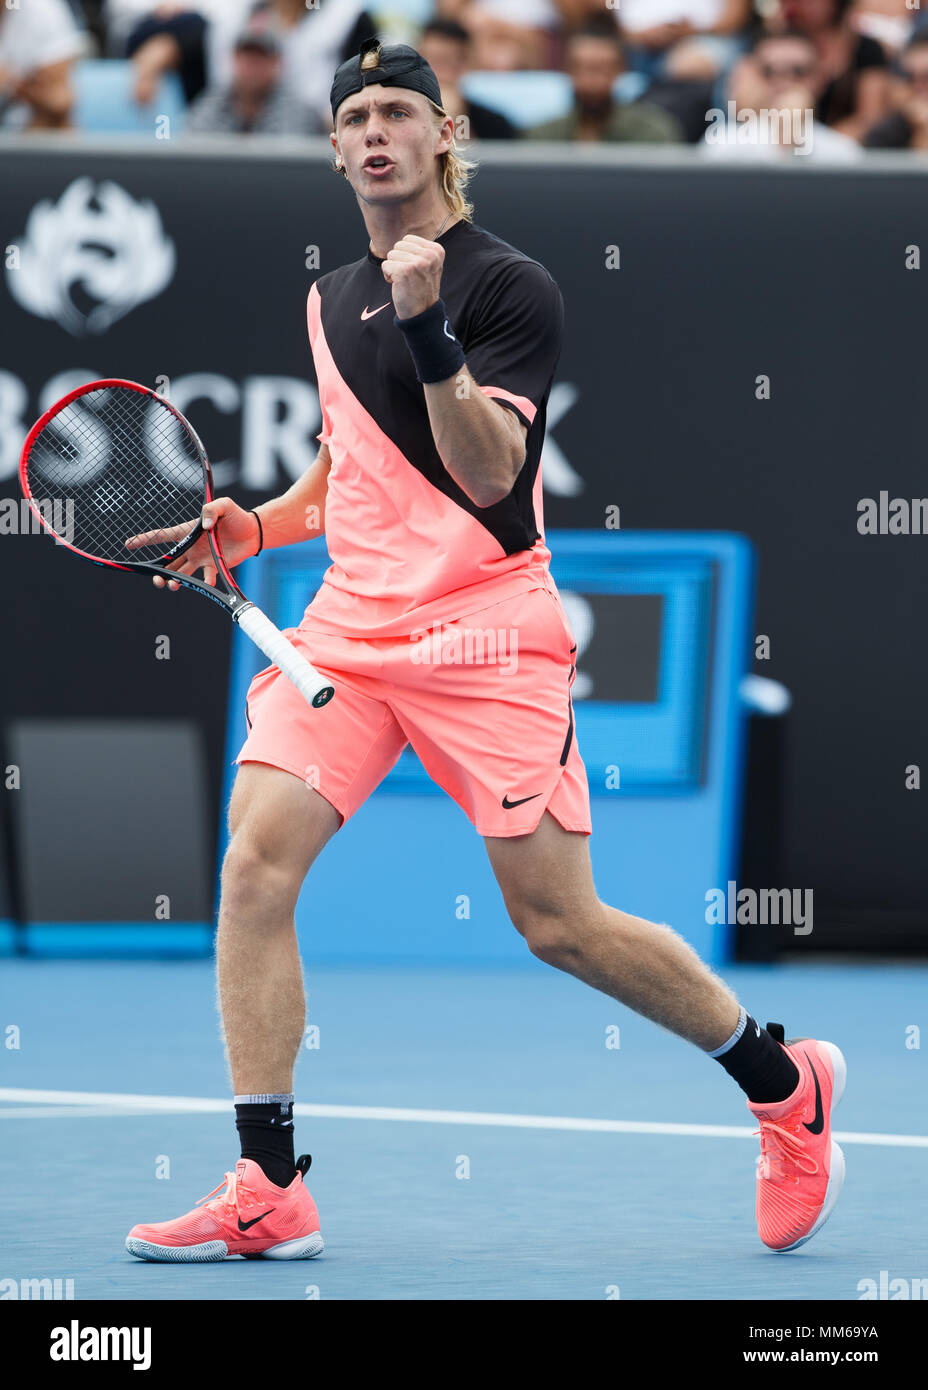 Canadian tennis player Denis Shapovalov making a fist and cheering during  men's singles match in Australian Open 2018 Tennis Tournament, Melbourne  Par Stock Photo - Alamy